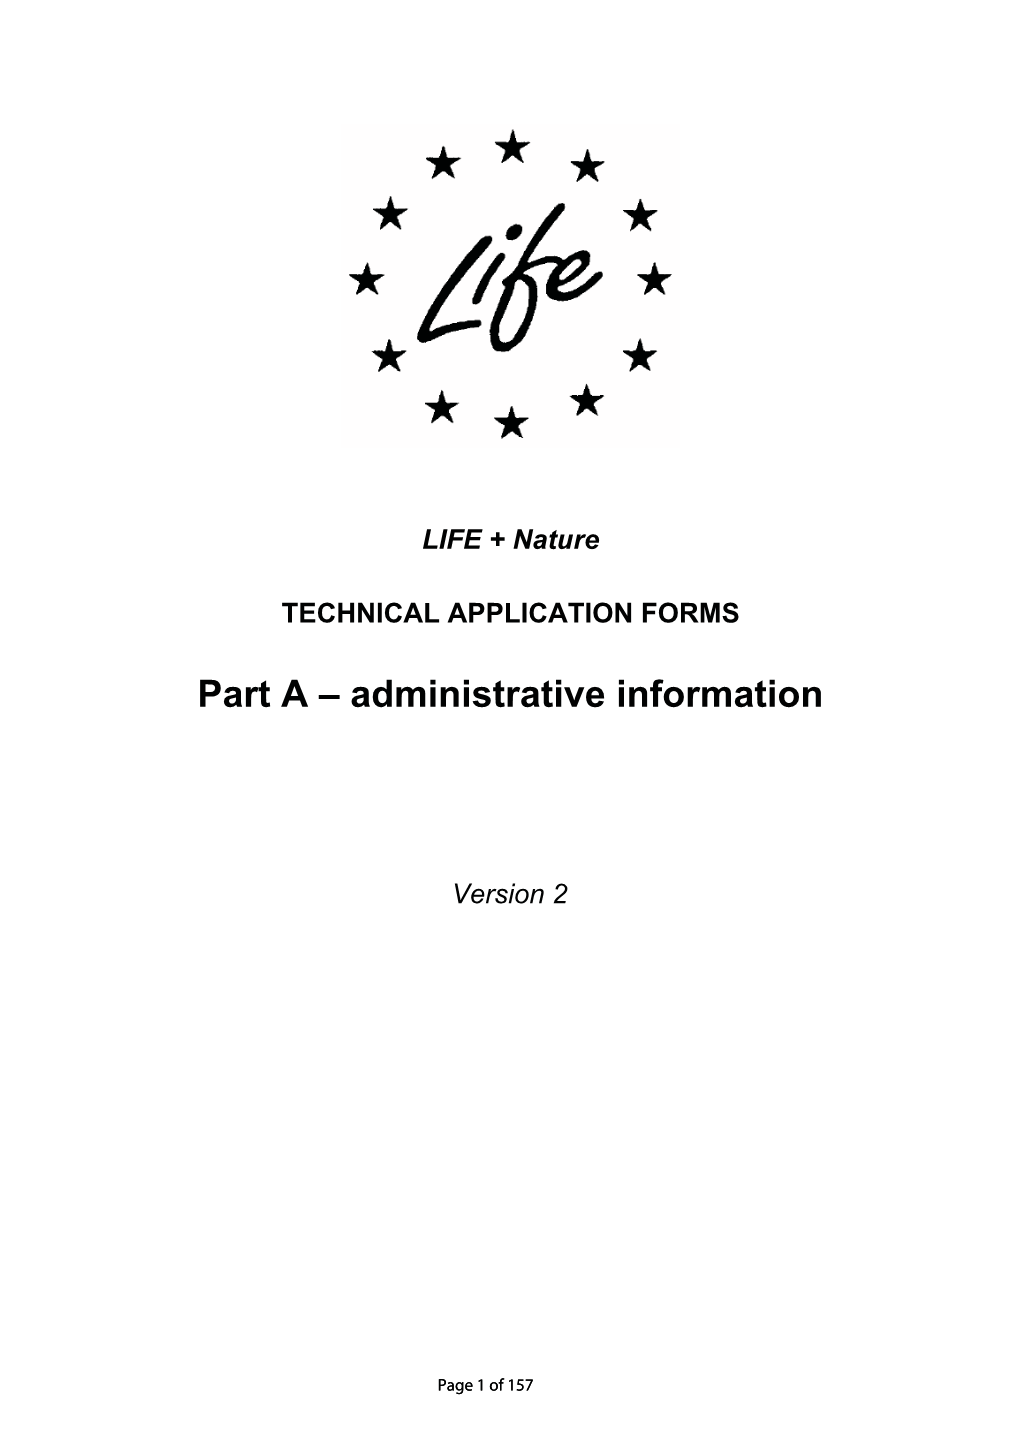 Part a – Administrative Information